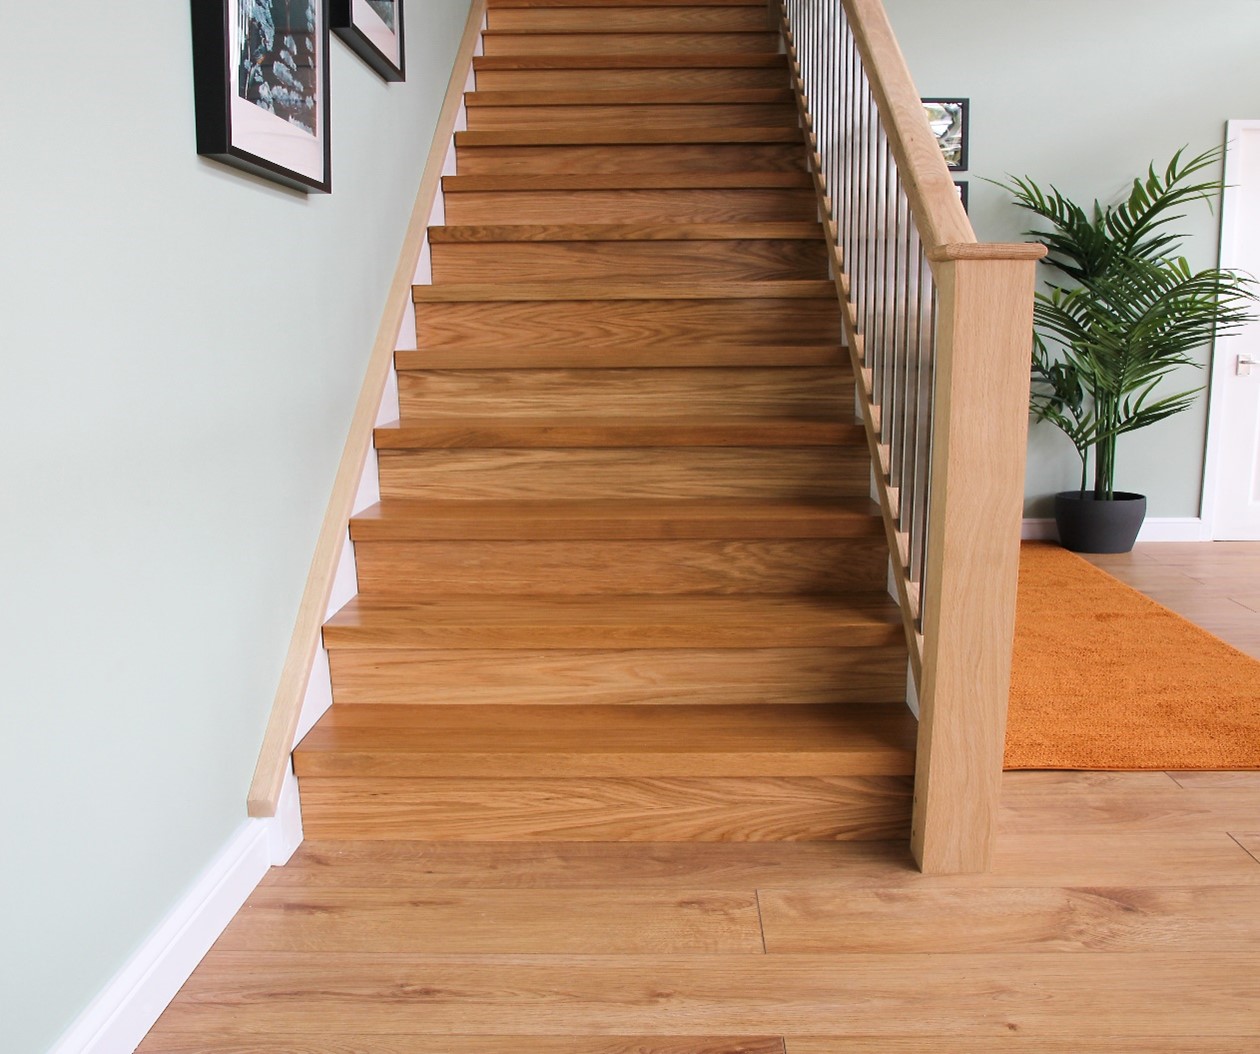 Oak cladded staircase